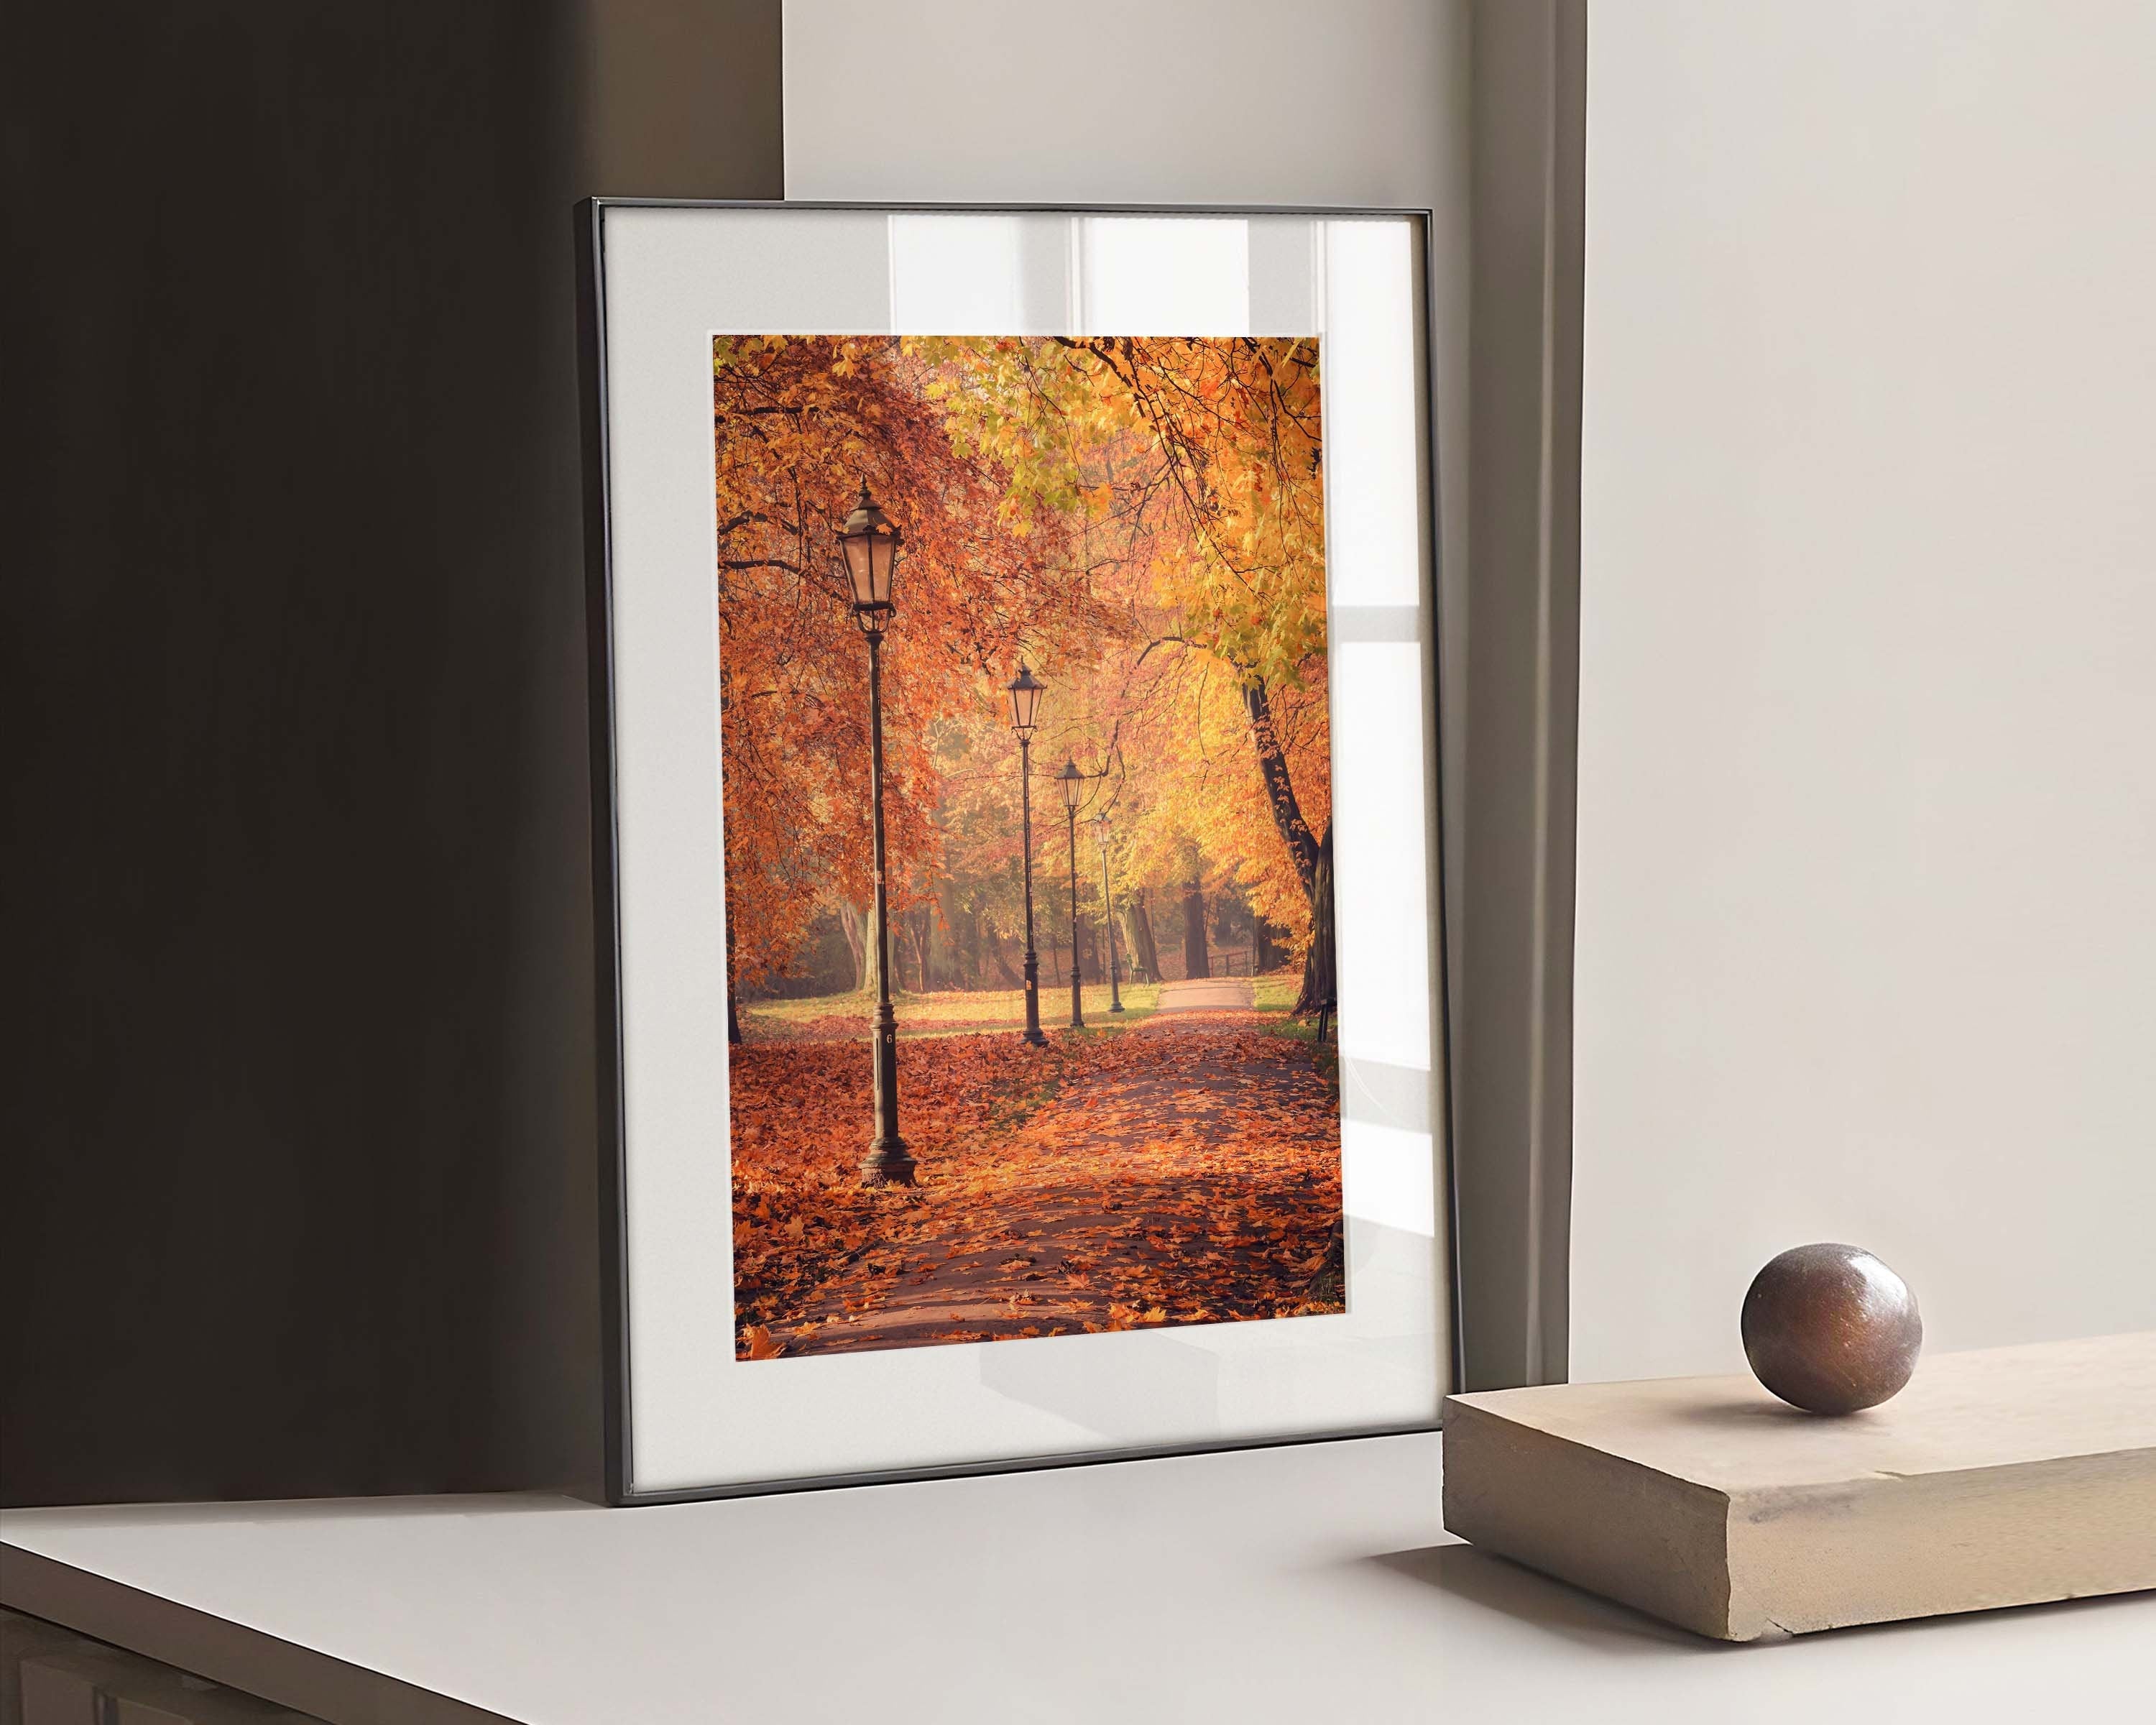 Photo print featuring a picturesque path blanketed in golden fall leaves. The traditional street lights and the old trees give character to the scene. This print truly captures the magic of fall. Hang it in your living room or hallway to bring the captivating beauty of fall into your everyday life.